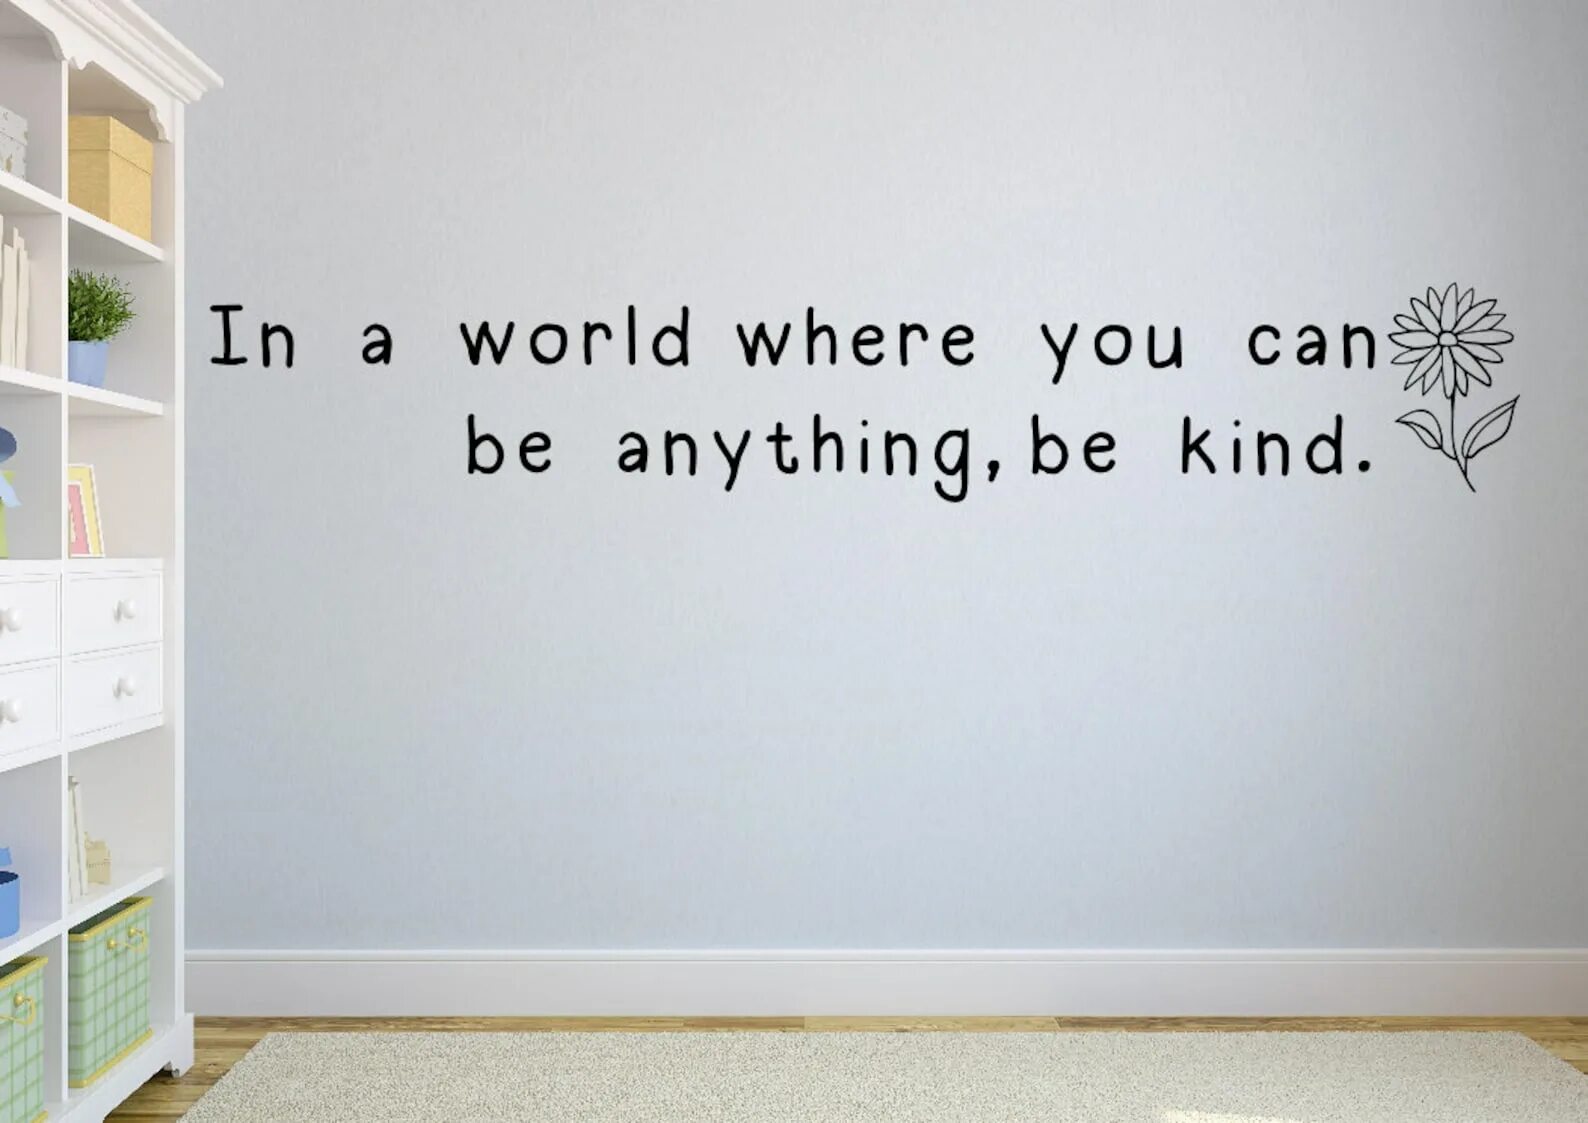 This can have anything. In a World where you can be anything be kind. Be kind картинка. Be kind обои серые. Be kind пикселями.